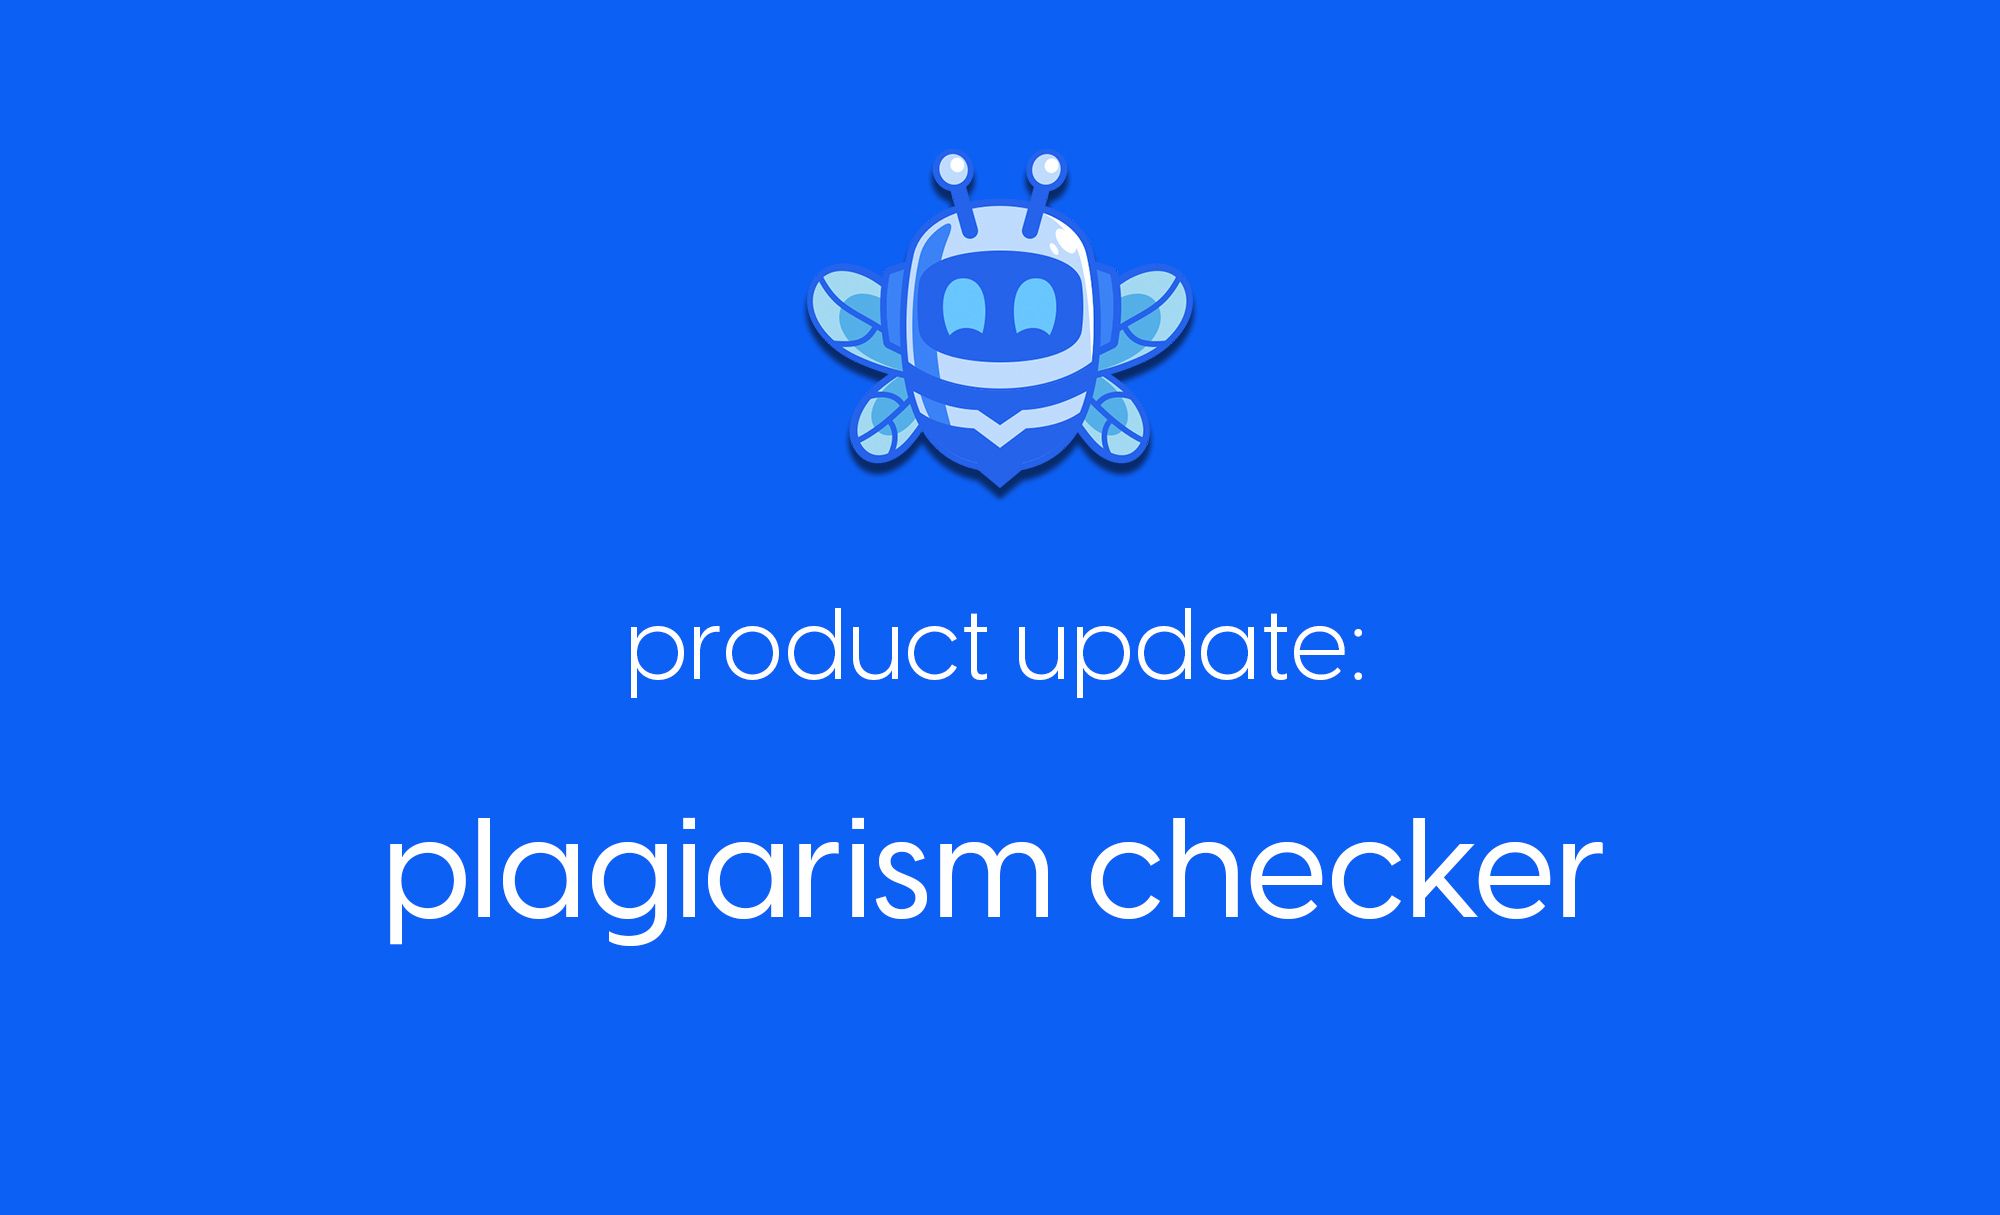 online assignment plagiarism checker project github